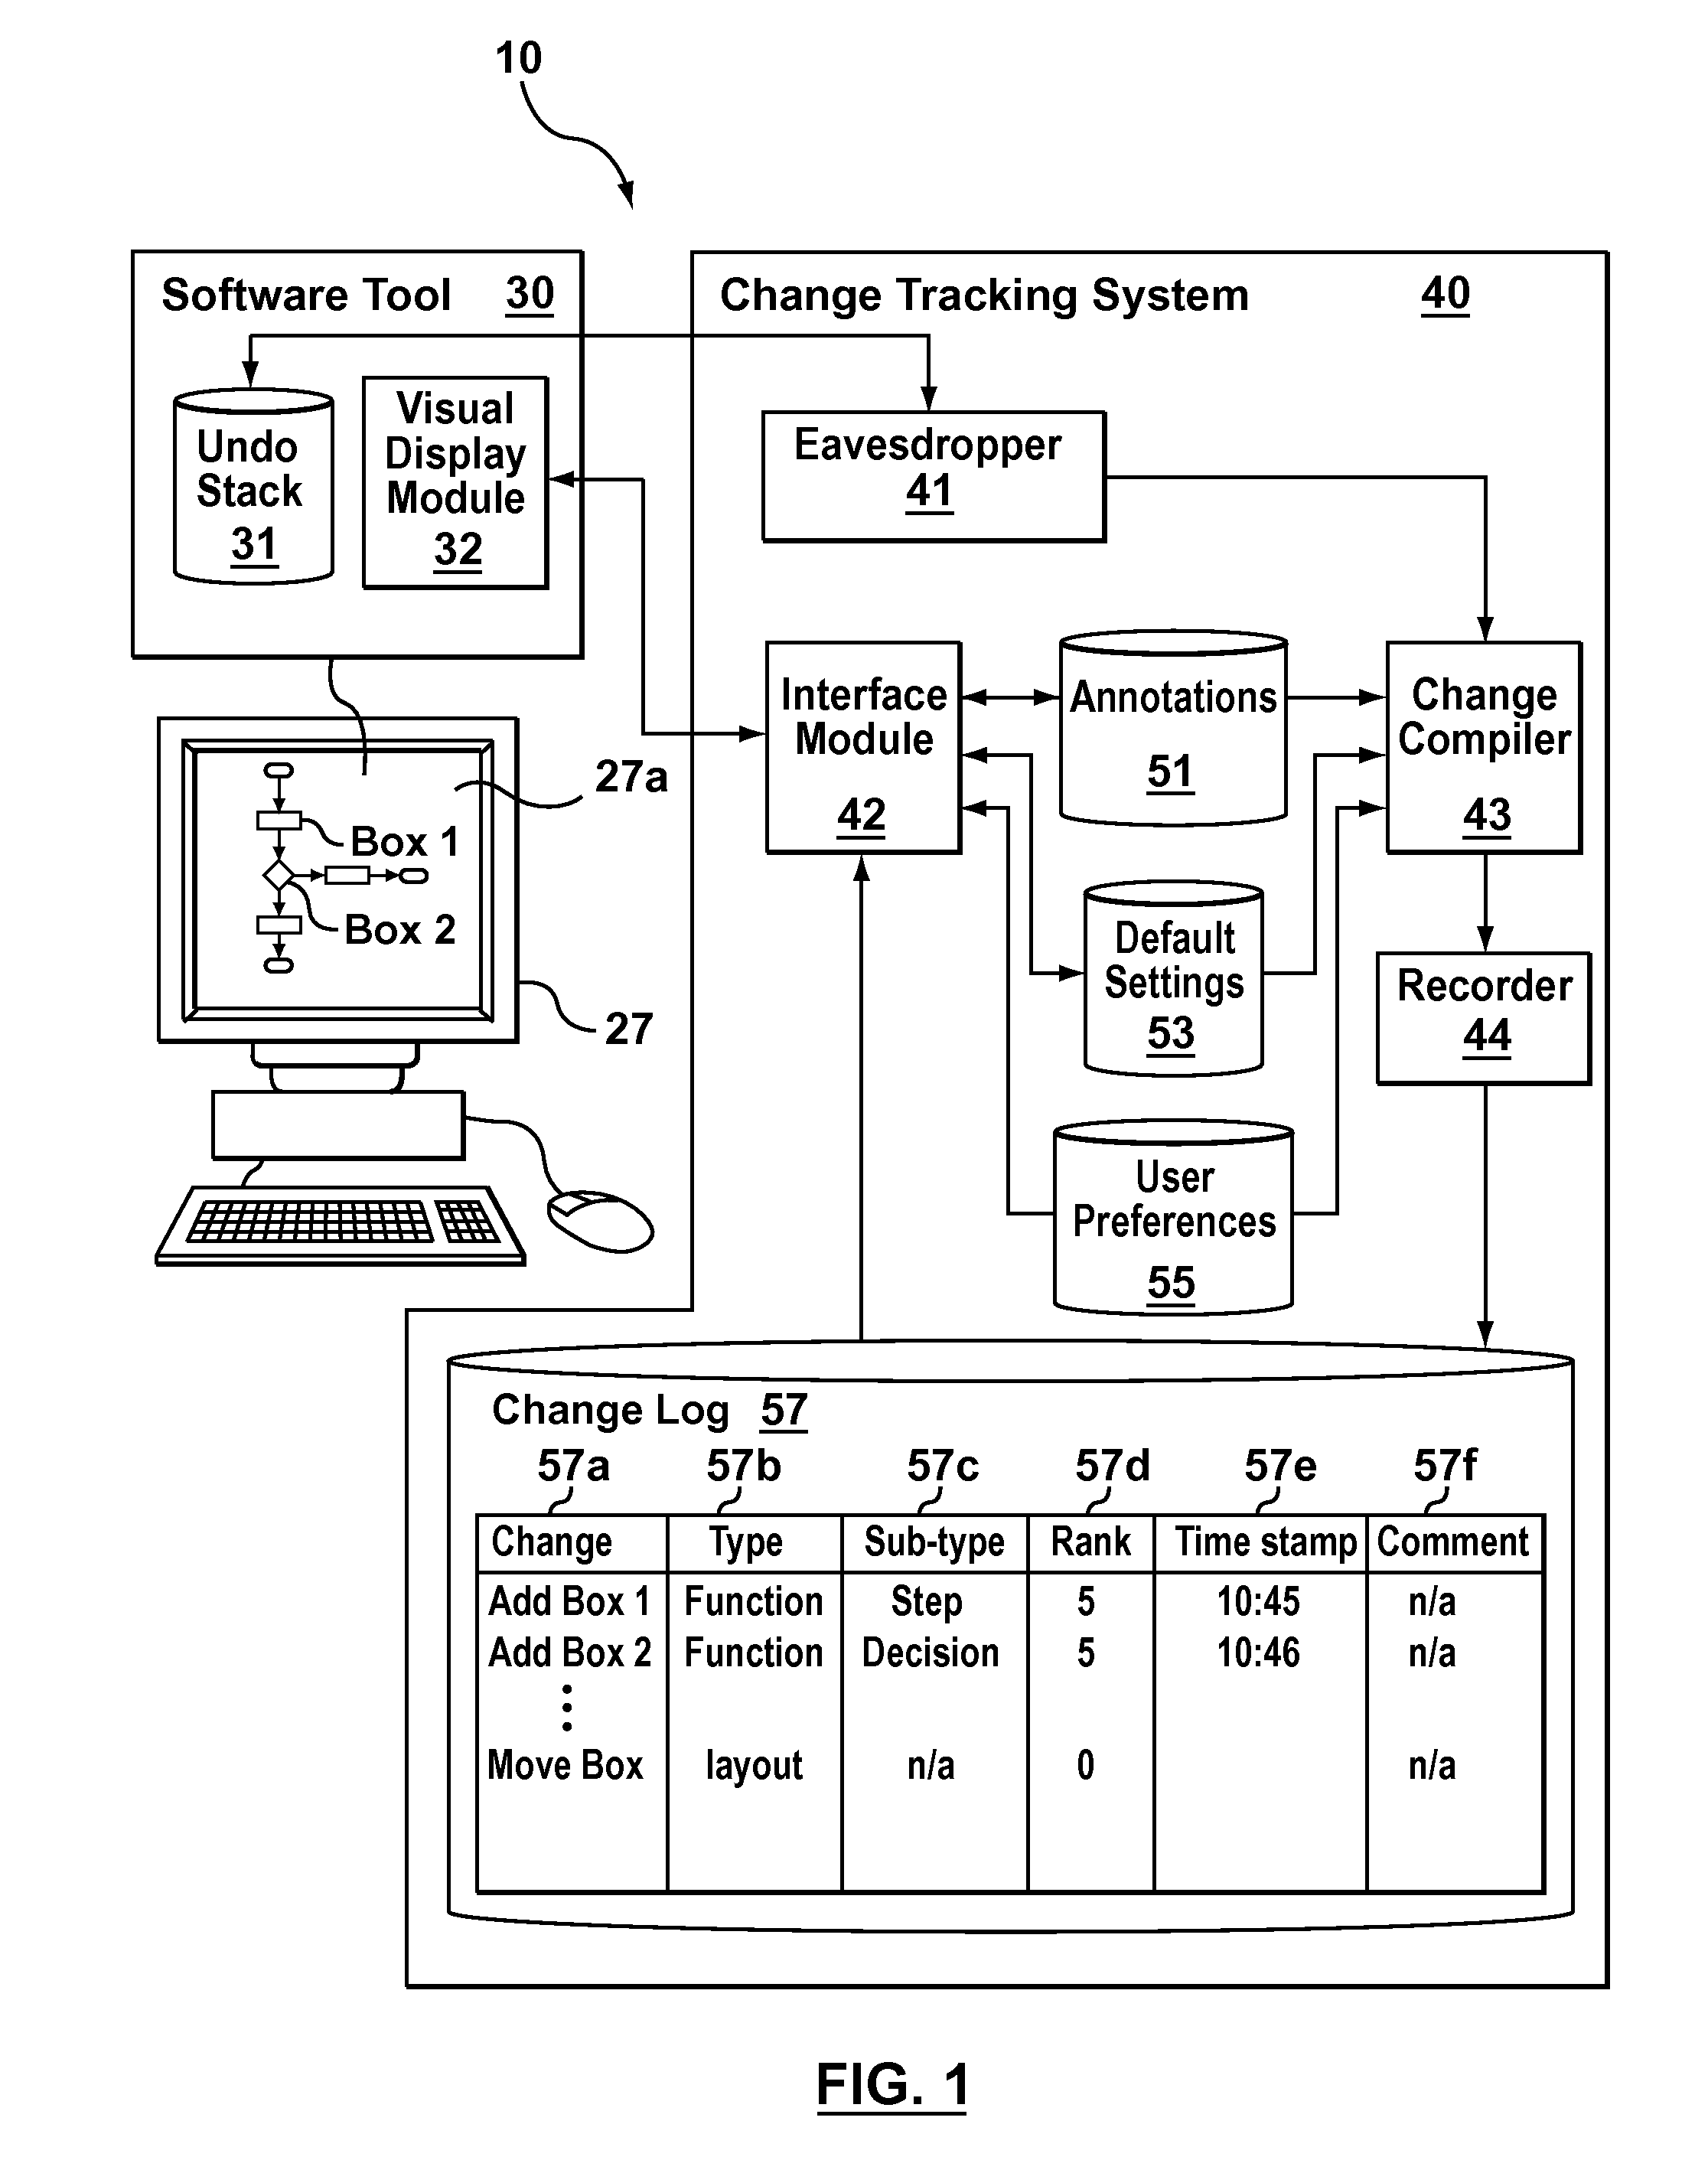 Systems, method and computer program products for tracking and viewing changes to information stored in a data structure